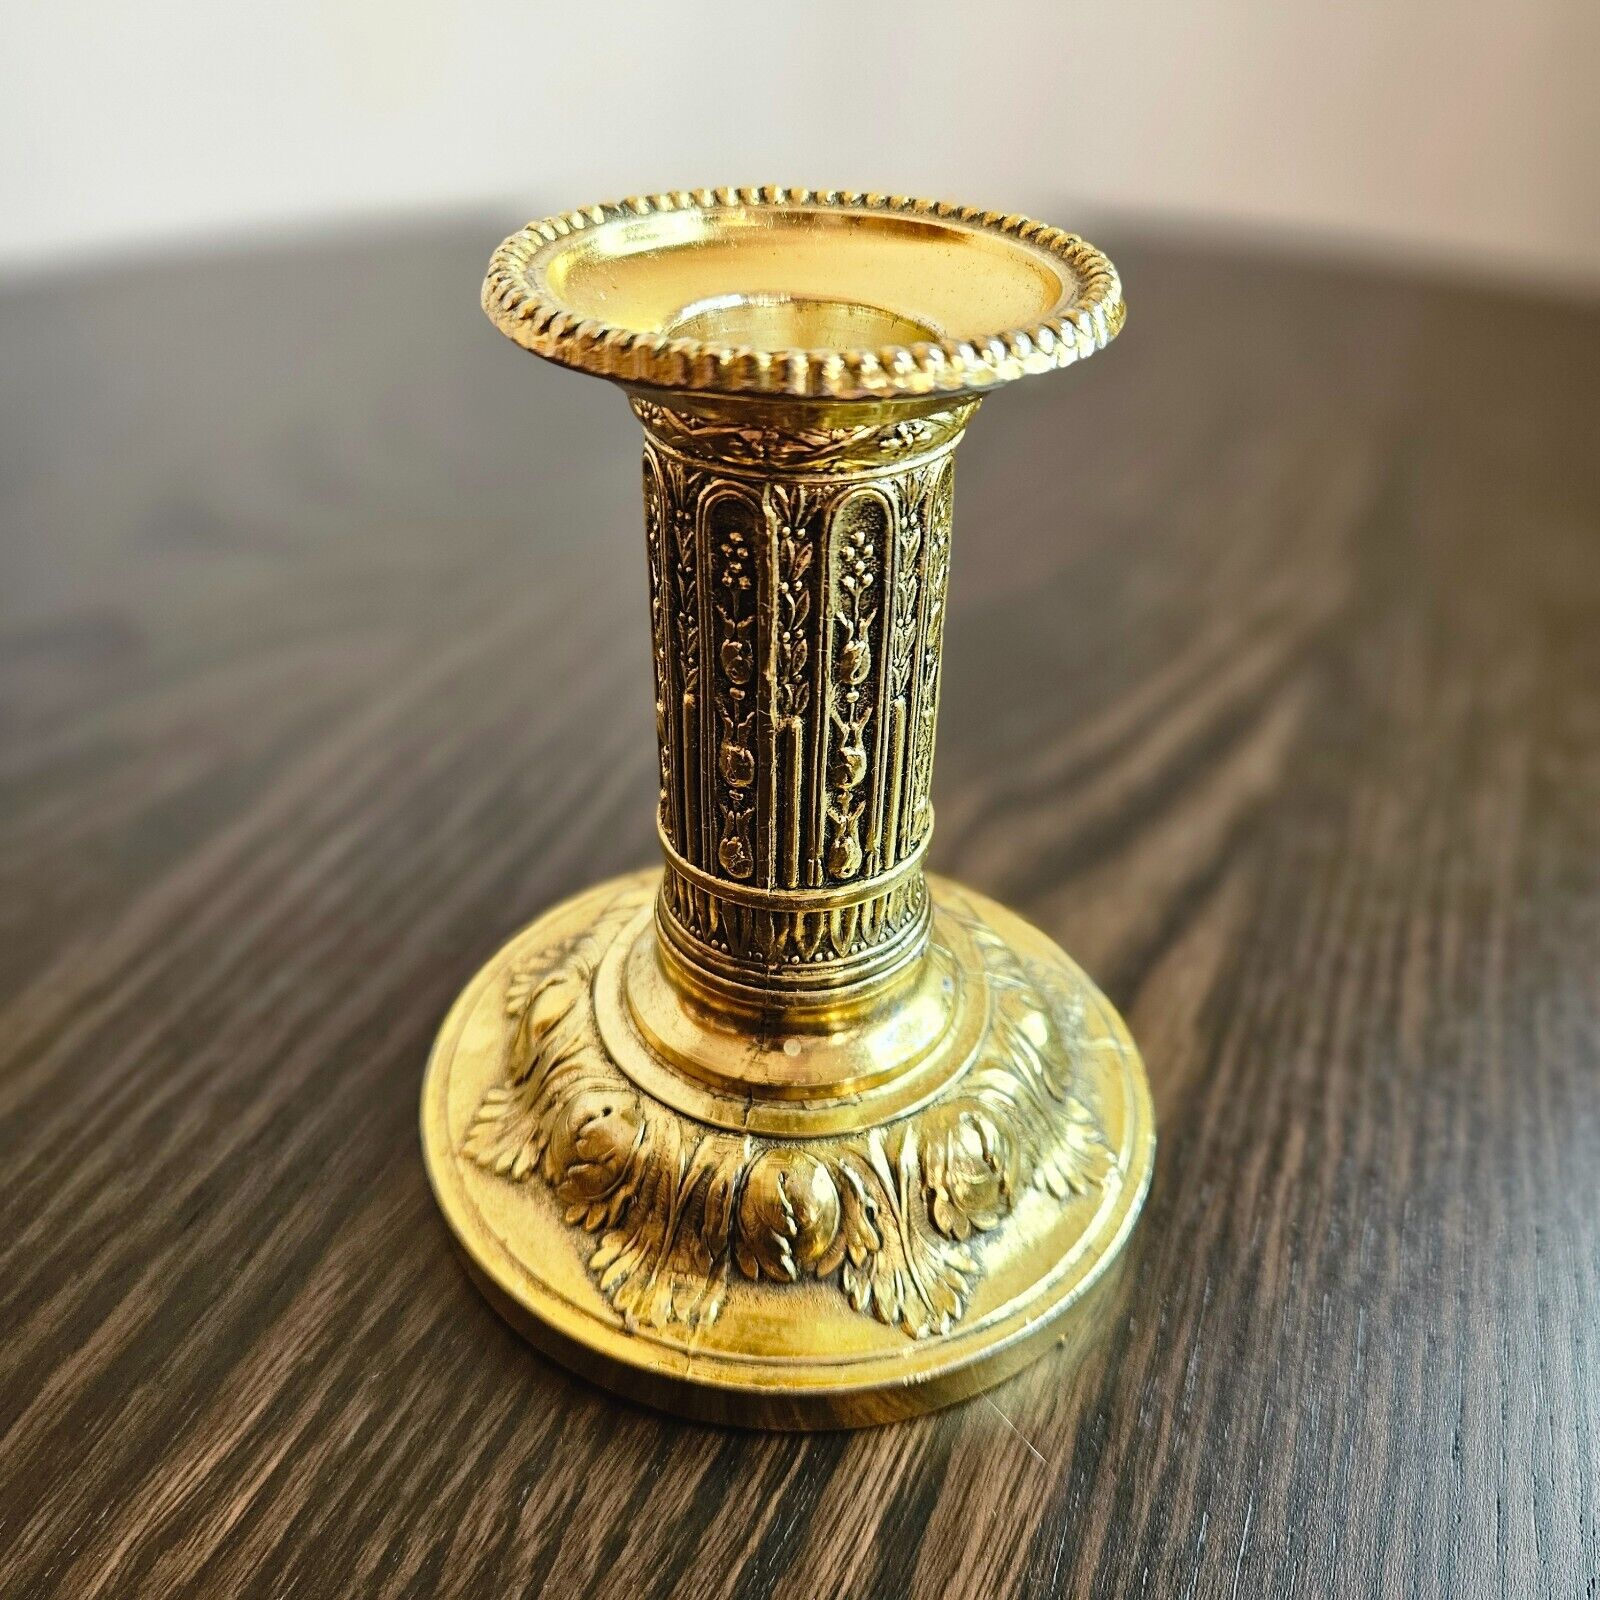 Handmade Old Vintage Brass Golden Candle Holder with Beautiful Engraving